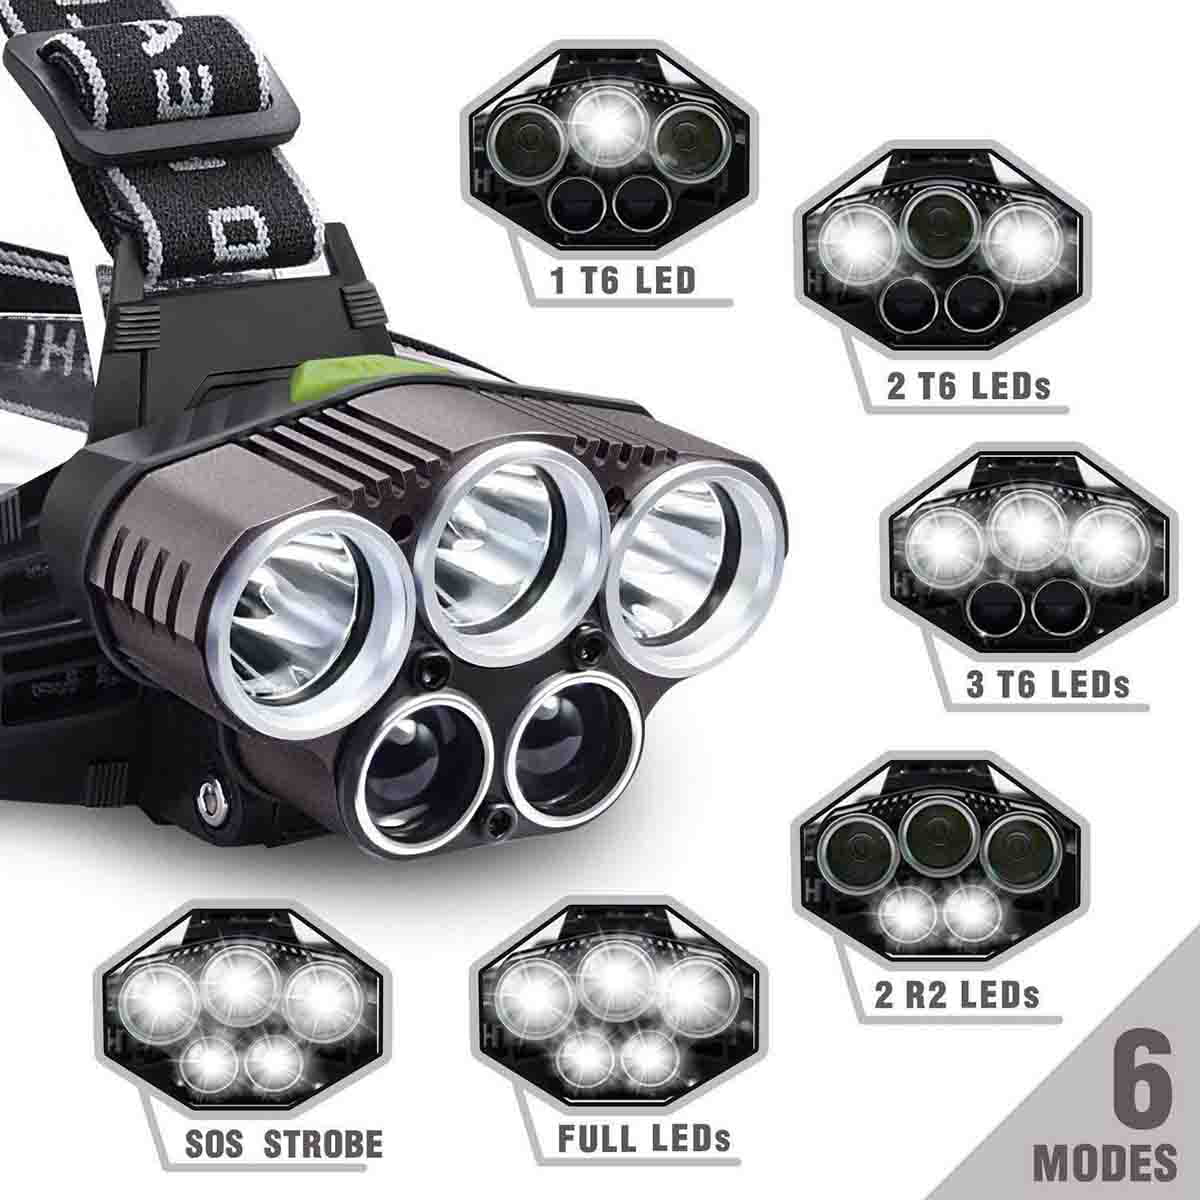 Zoom Headlamp 350000LM Rechargeable T6 LED Headlight Flashlight Head Torch FishY